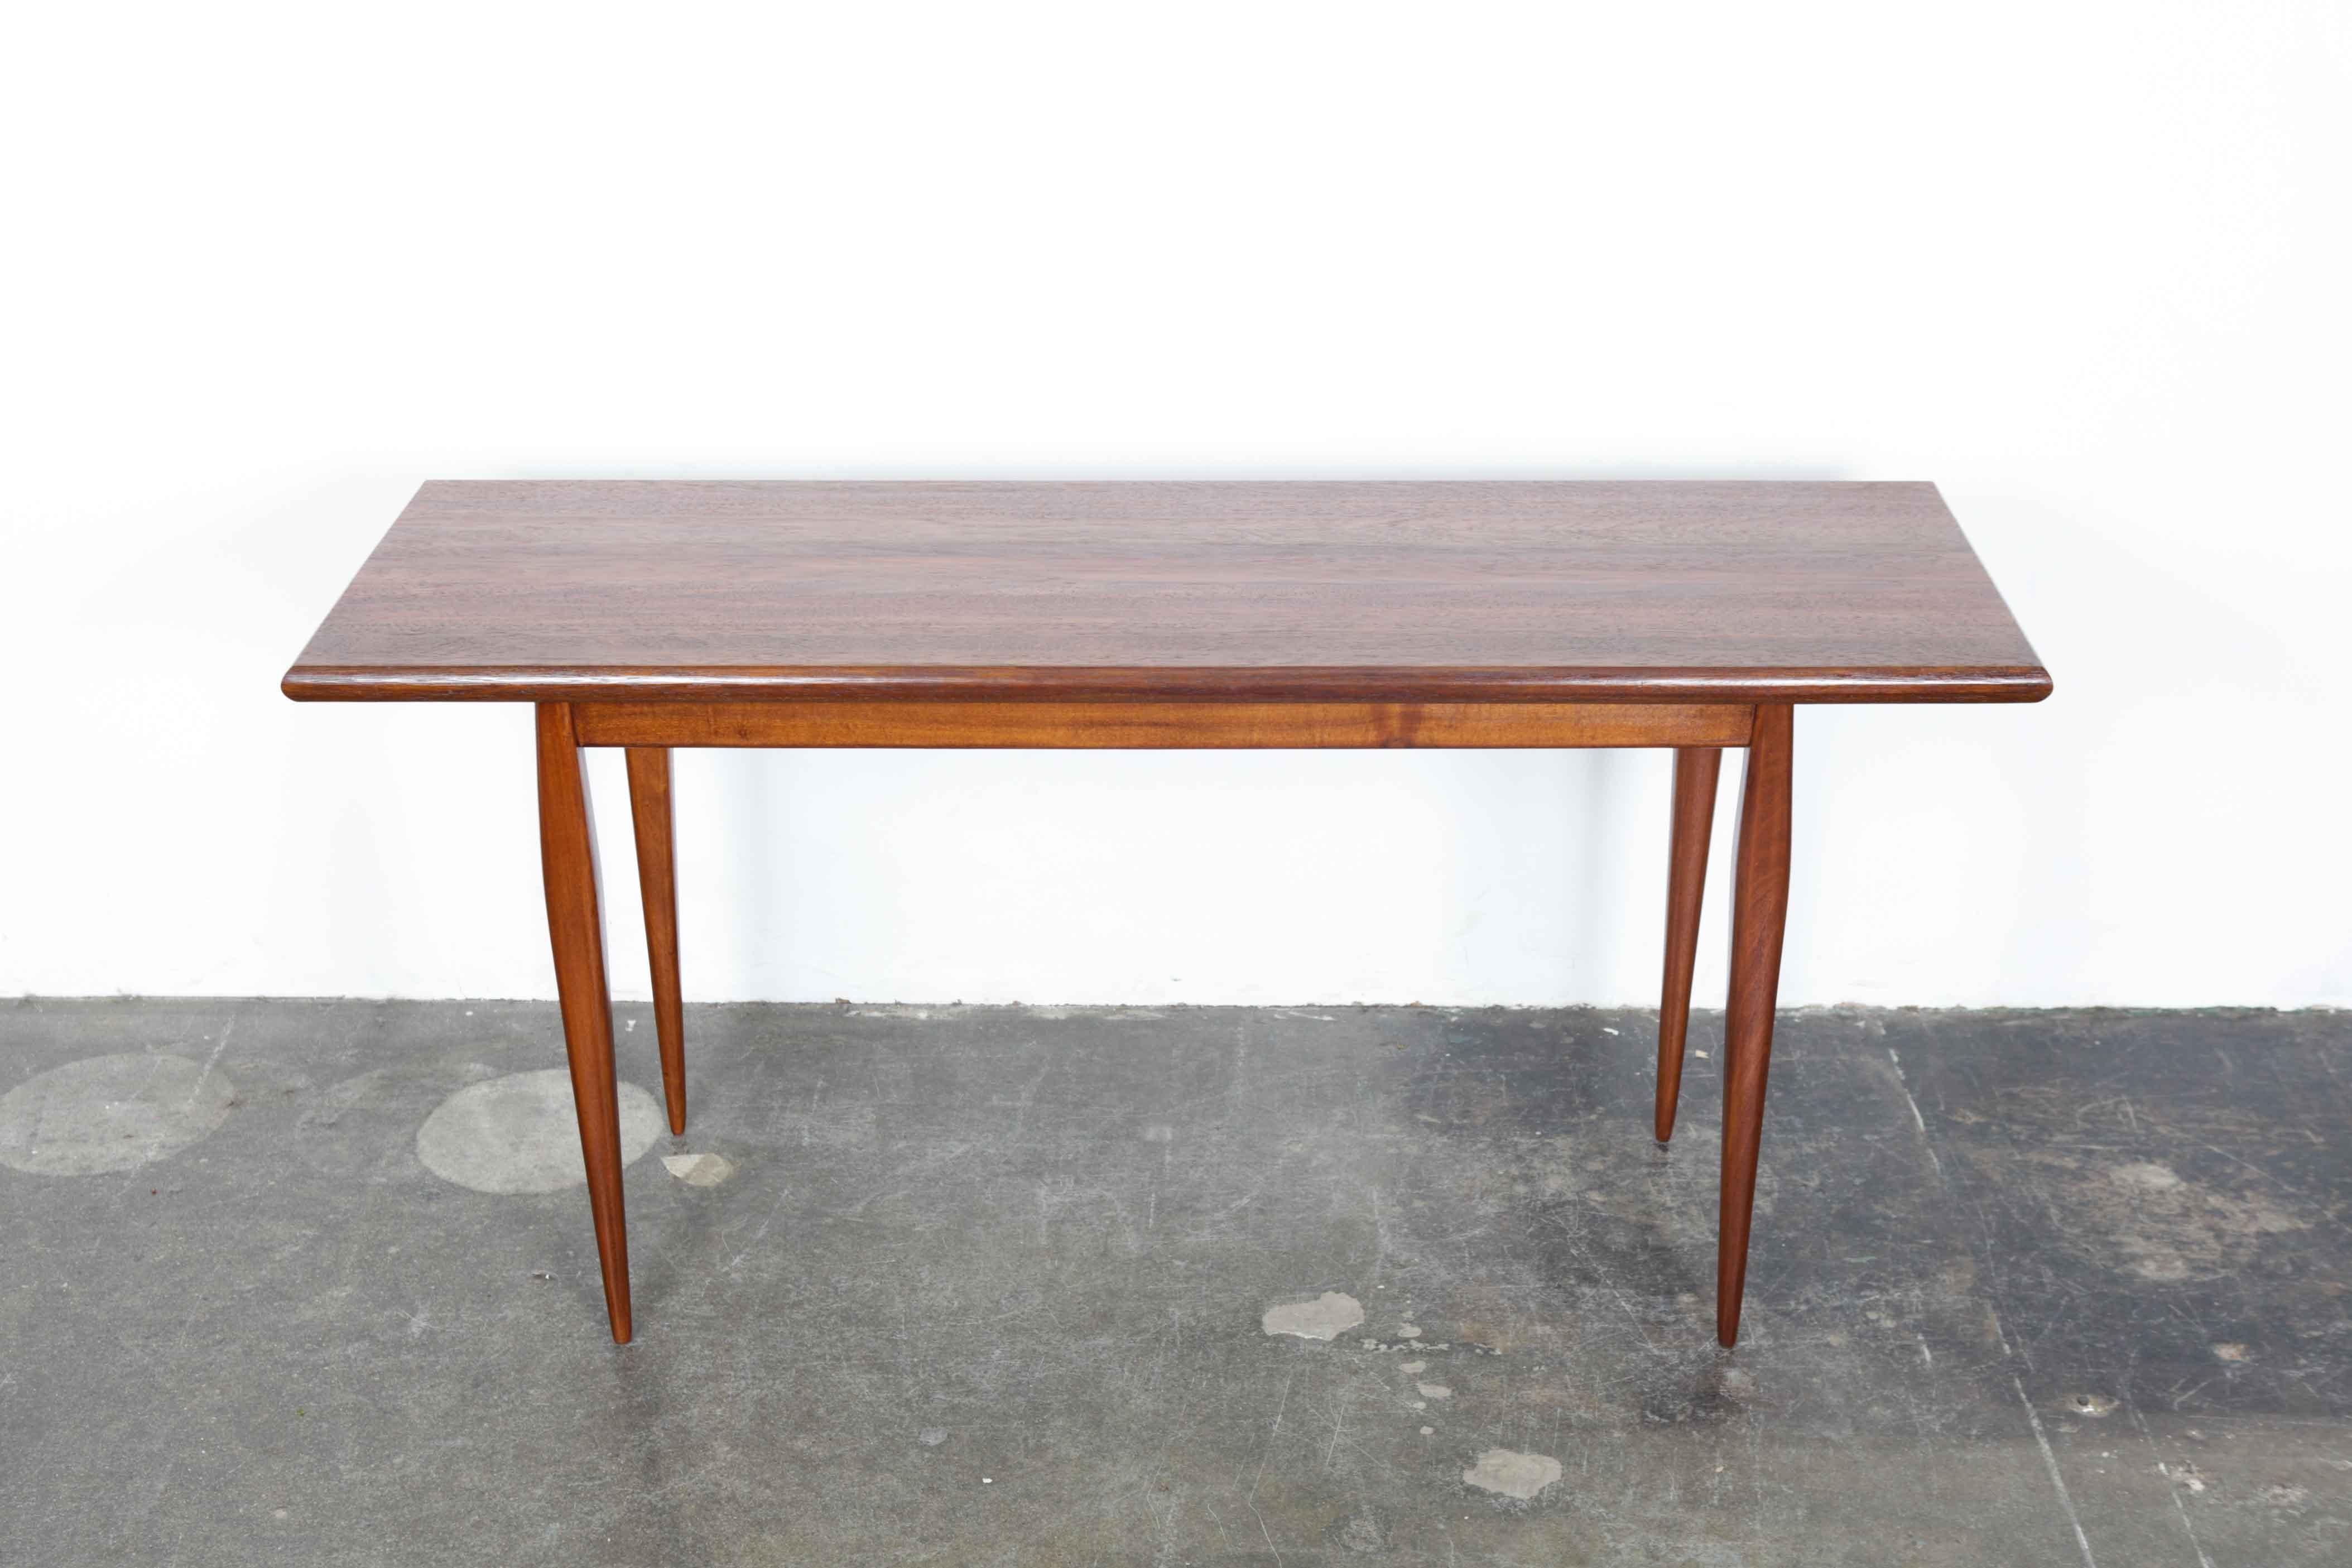 Brazilian 1960s solid wood console table or writing desk with tapering legs.